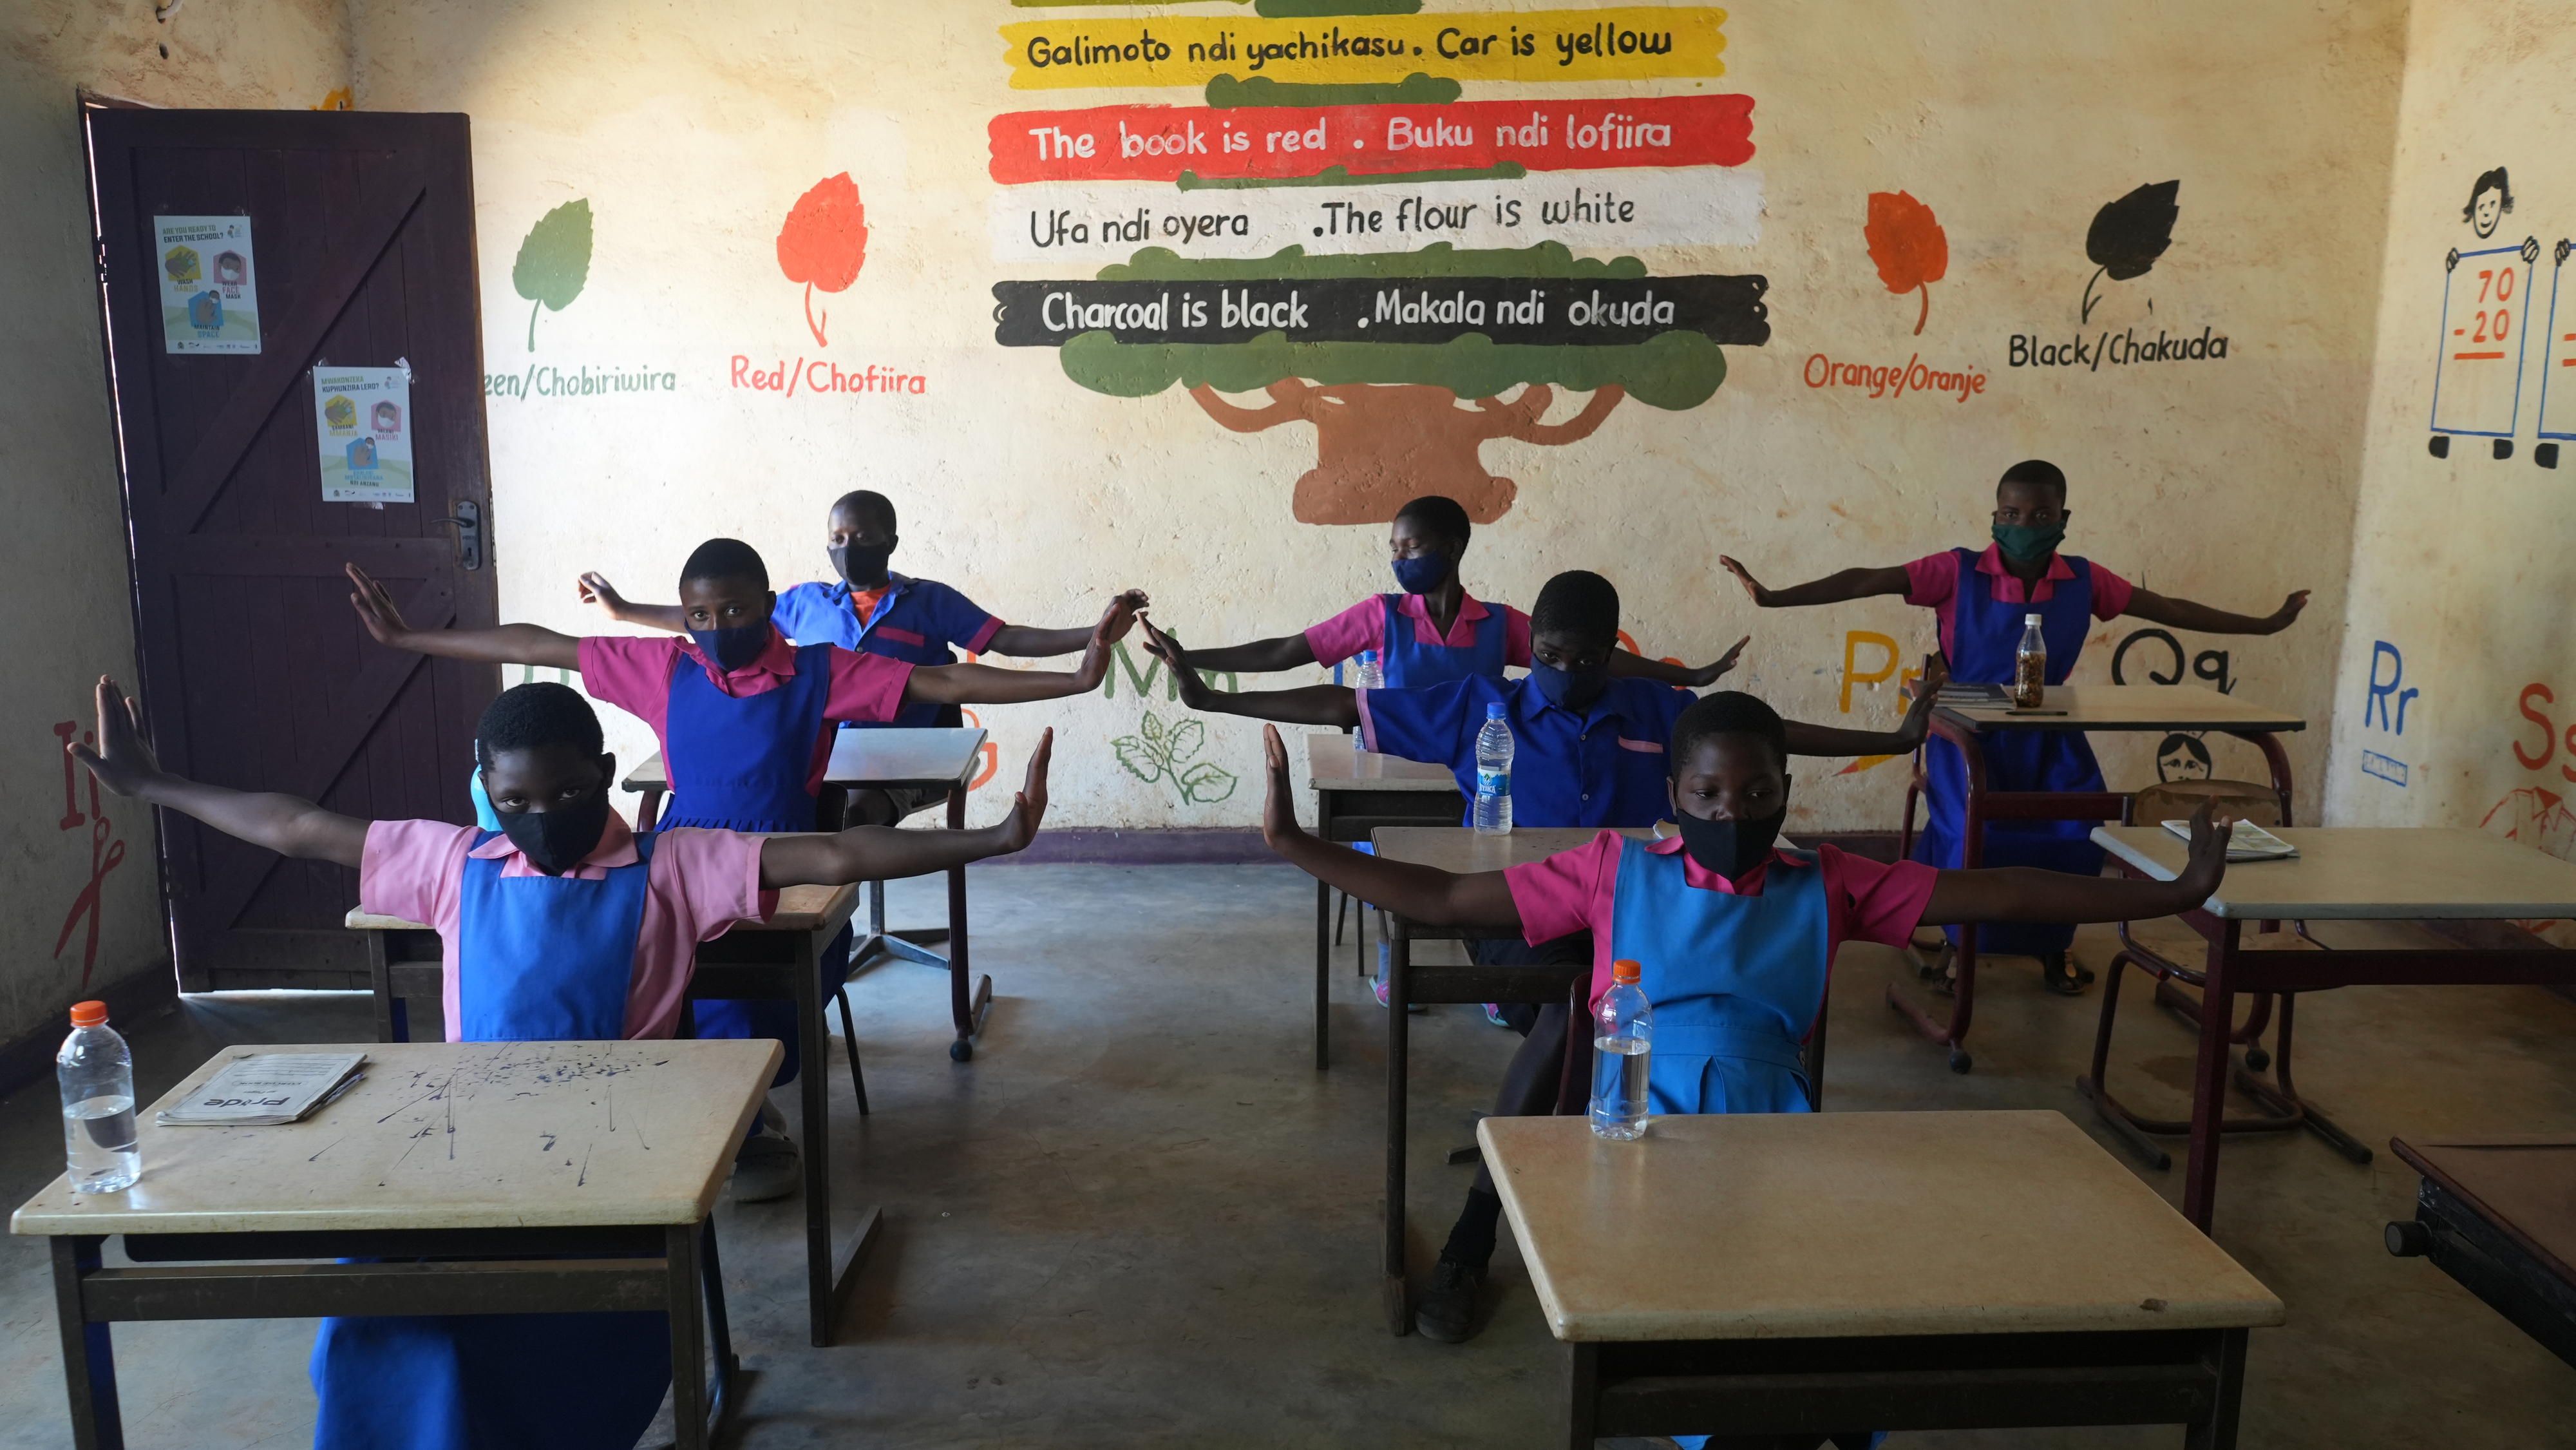 In a school in Malawi, children learn how to prevent a COVID-19 infection.